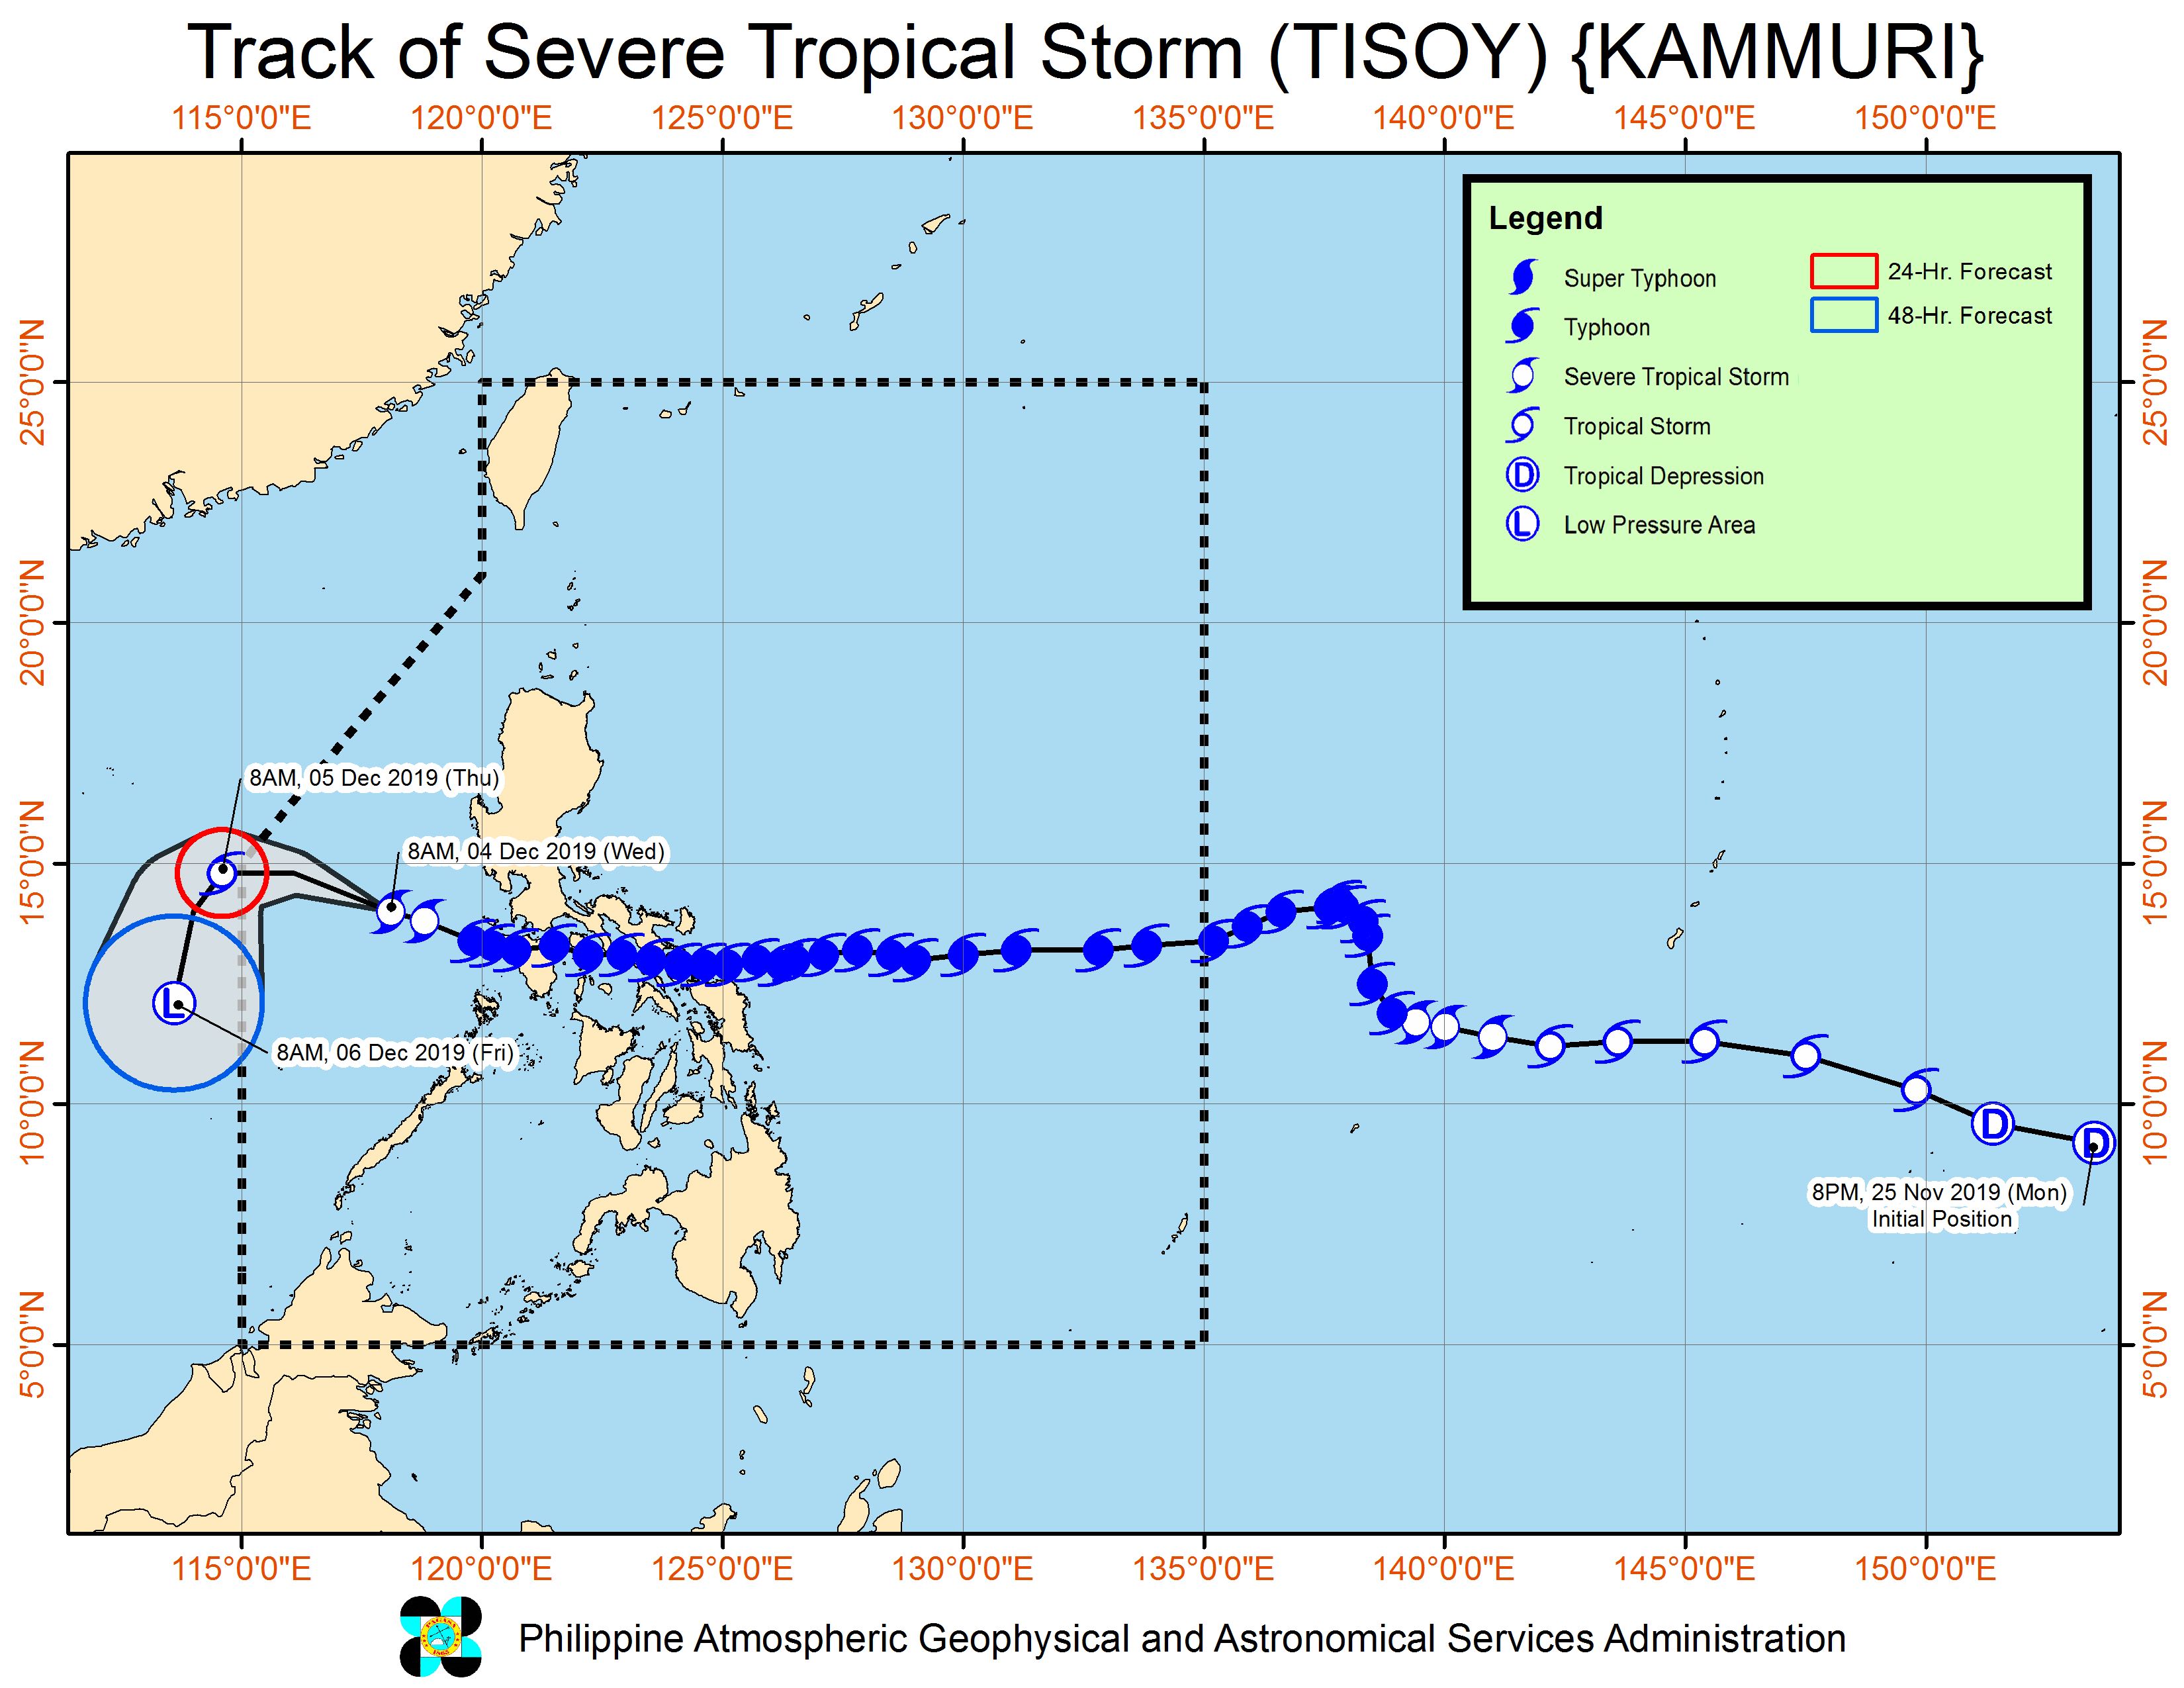 Forecast track of Severe Tropical Storm Tisoy (Kammuri) as of December 4, 2019, 11 am. Image from PAGASA 